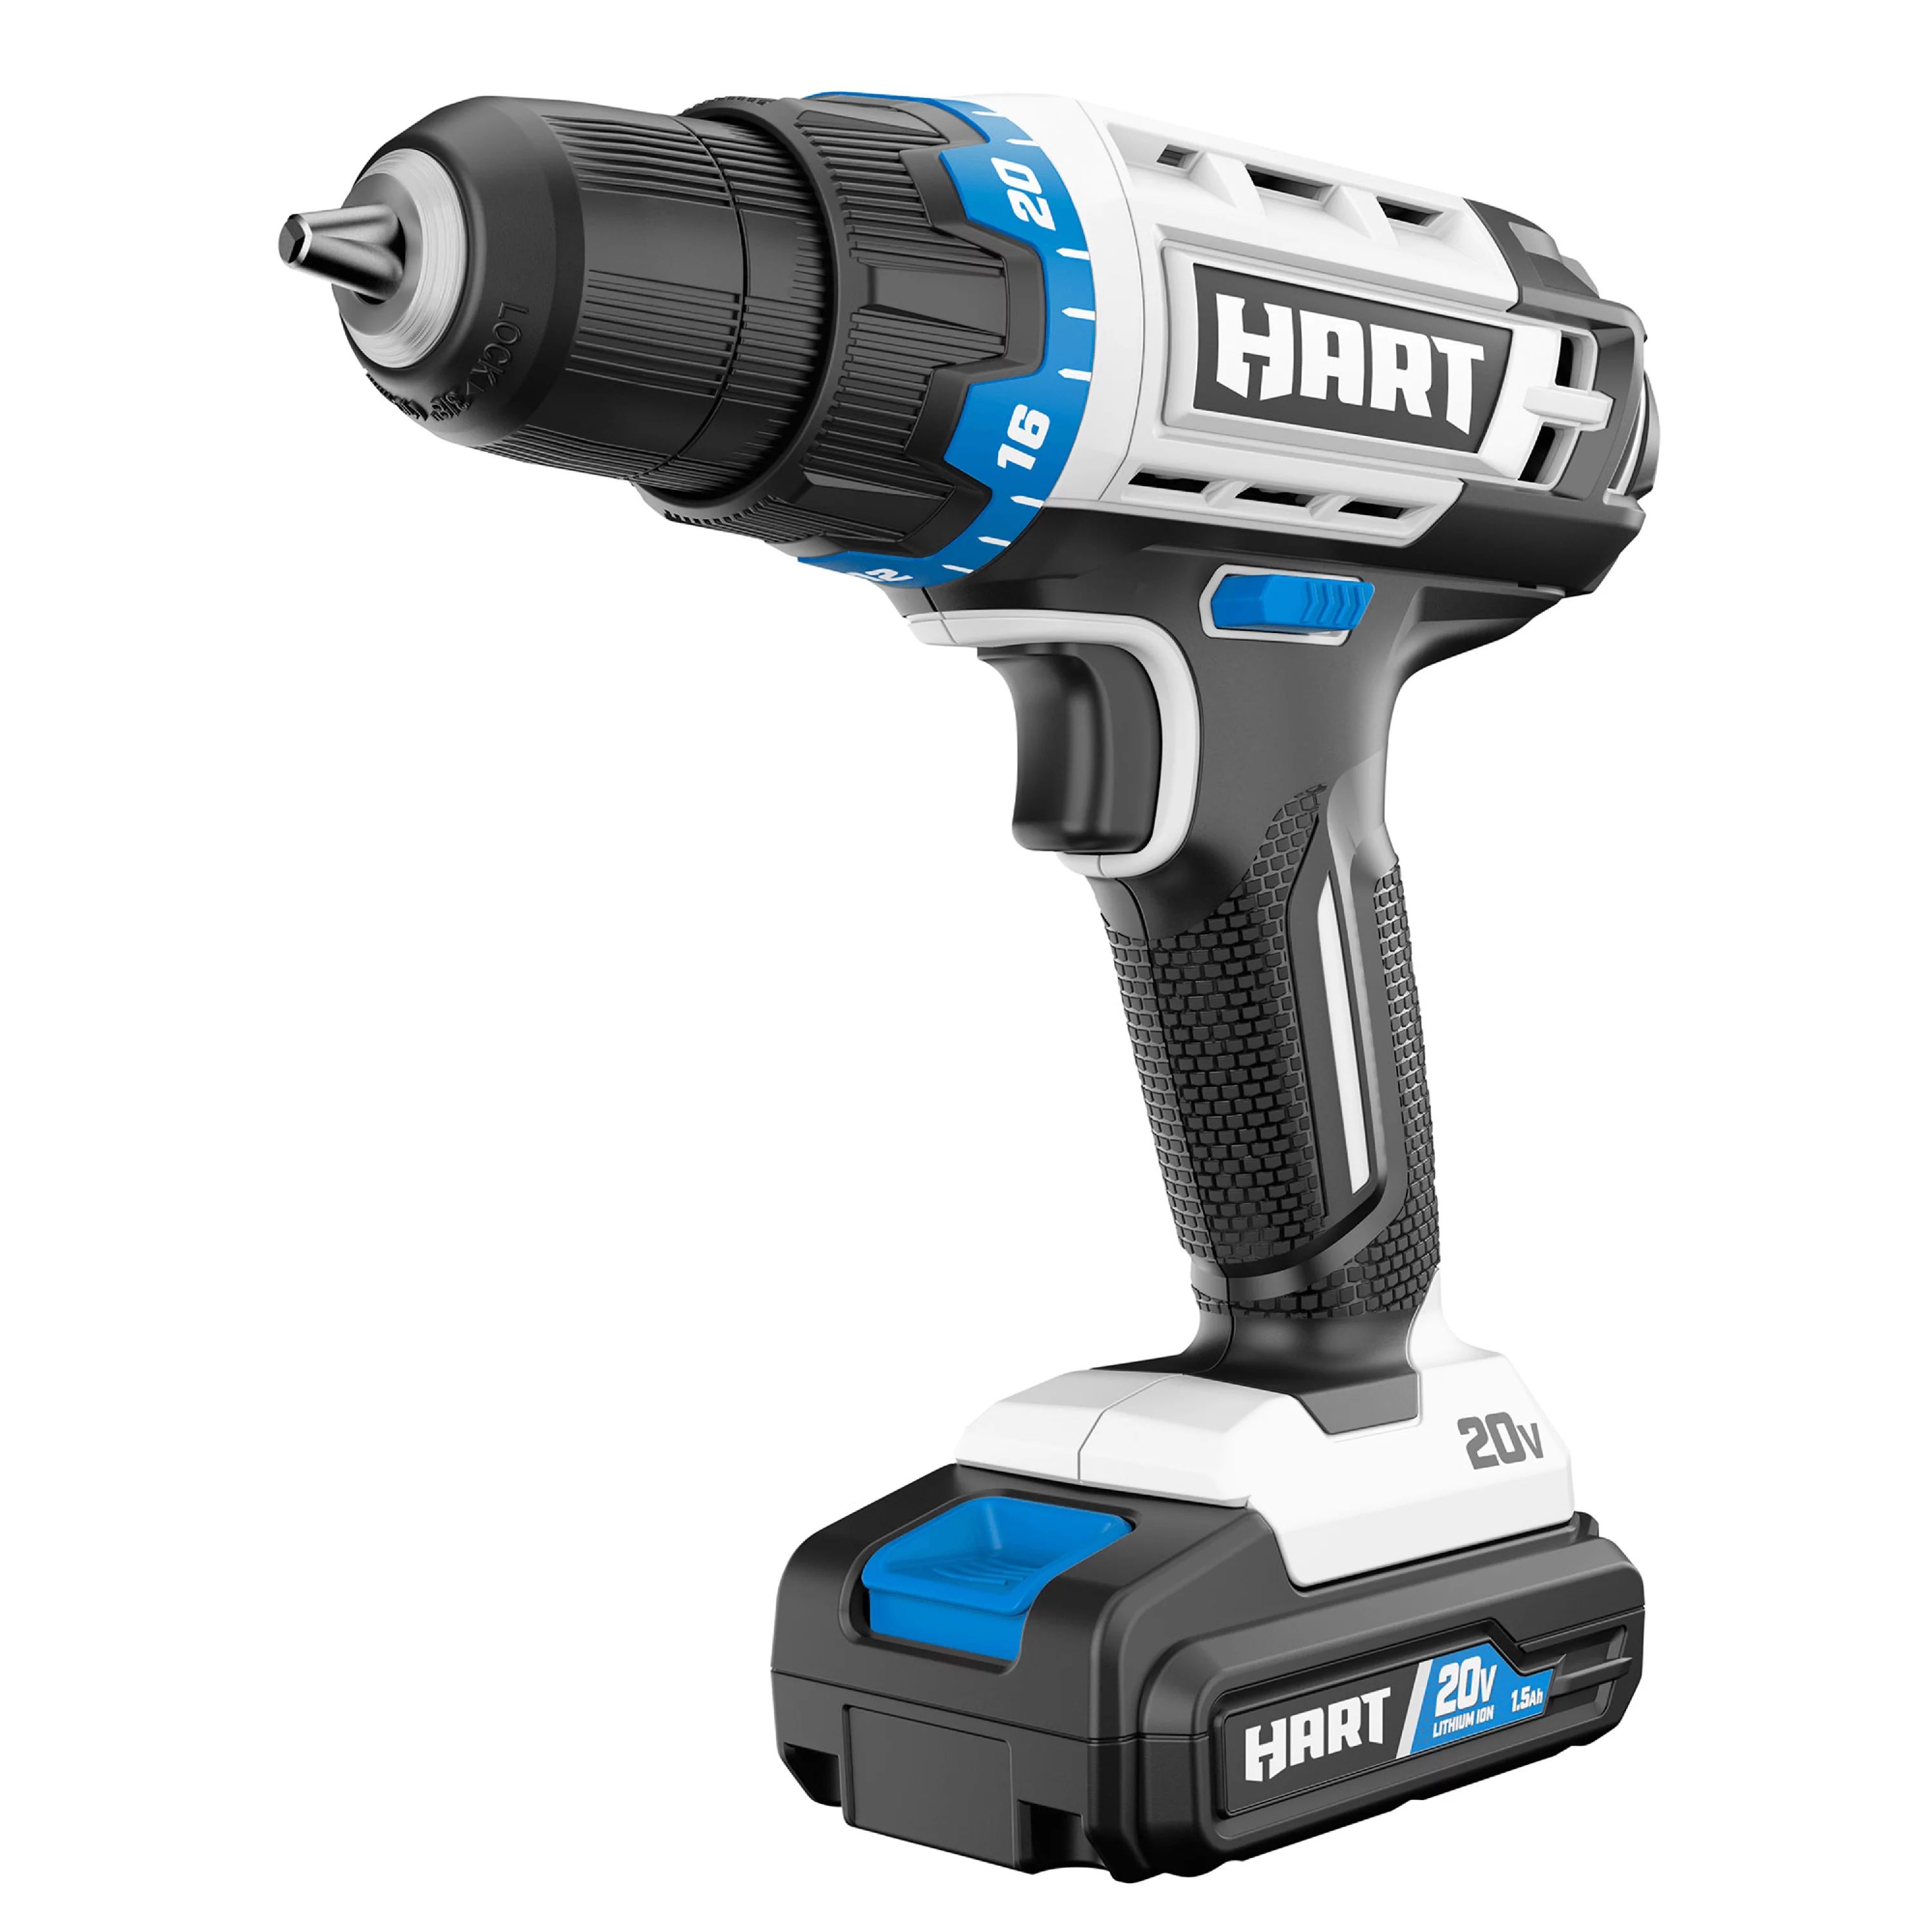 HART 20-Volt 3/8-inch Battery-Powered Drill/Driver Kit, (1) 1.5Ah Lithium-Ion Battery | Walmart (US)